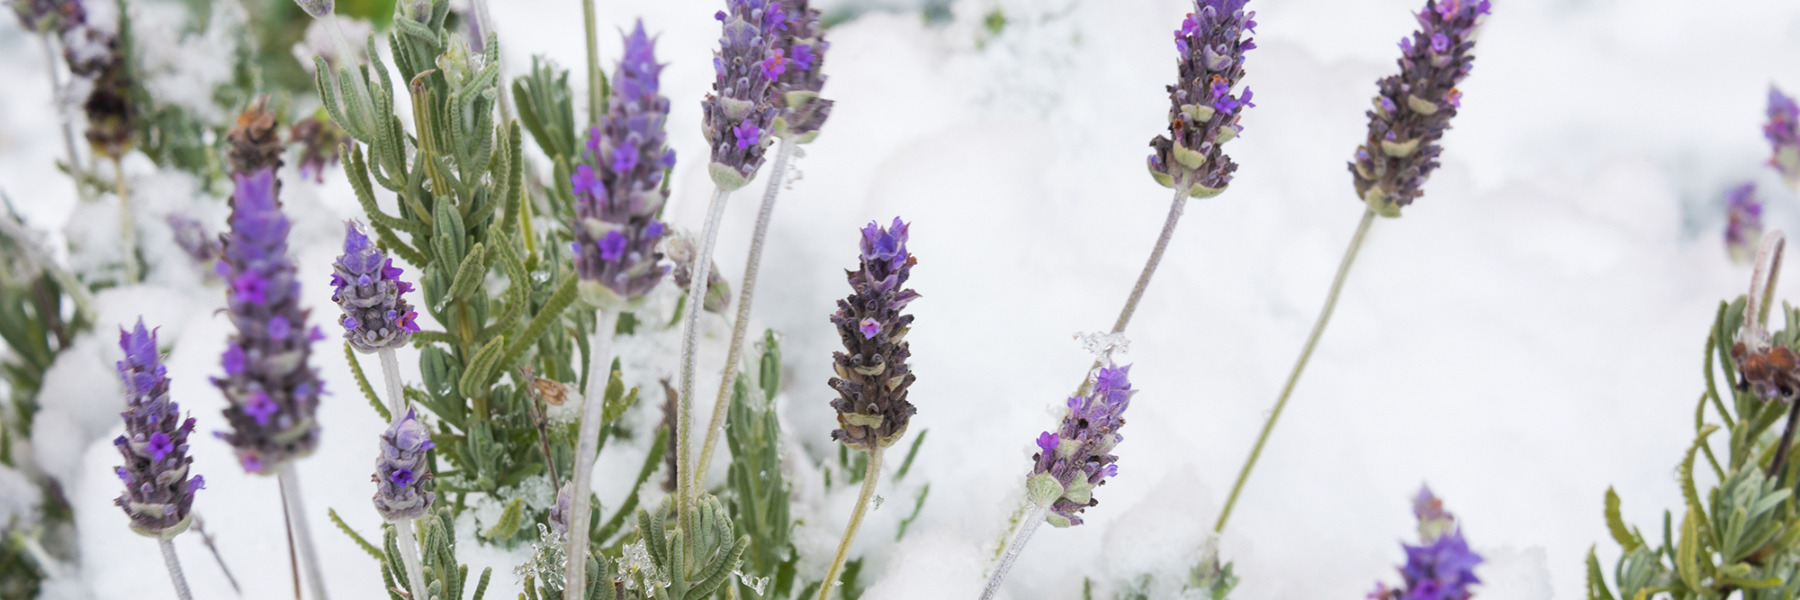 In the serene image, a picturesque landscape reveals the delicate beauty of lavender flowers juxtaposed against a pure and glistening bed of fresh snow. The photo captures the essence of a tranquil winter morning, with nature's artistry on full display. In the foreground, slender lavender stems, with their characteristic gray-green leaves, gracefully emerge from the frozen ground. These hardy perennials, usually associated with warm, sunny landscapes, now stand as an emblem of resilience in the face of winter's chill. The lavender blooms, typically a soothing shade of purple, offer a striking contrast to the pristine whiteness of the snow. Each cluster of flowers appears as a tiny, frozen bouquet, delicate and exquisite in its frozen state. The individual petals, now tinged with frost, exhibit a fragile, crystalline quality, their edges resembling the finest lacework. The lavender flowers rise gently from the snow like a scene from a fairytale, invoking a sense of calm and wonder. The tranquil scene captures the essence of nature's ability to find moments of beauty even in the harshest of seasons. This photo encapsulates the serene, magical aura of winter and the charm of lavender in a snow-covered landscape.